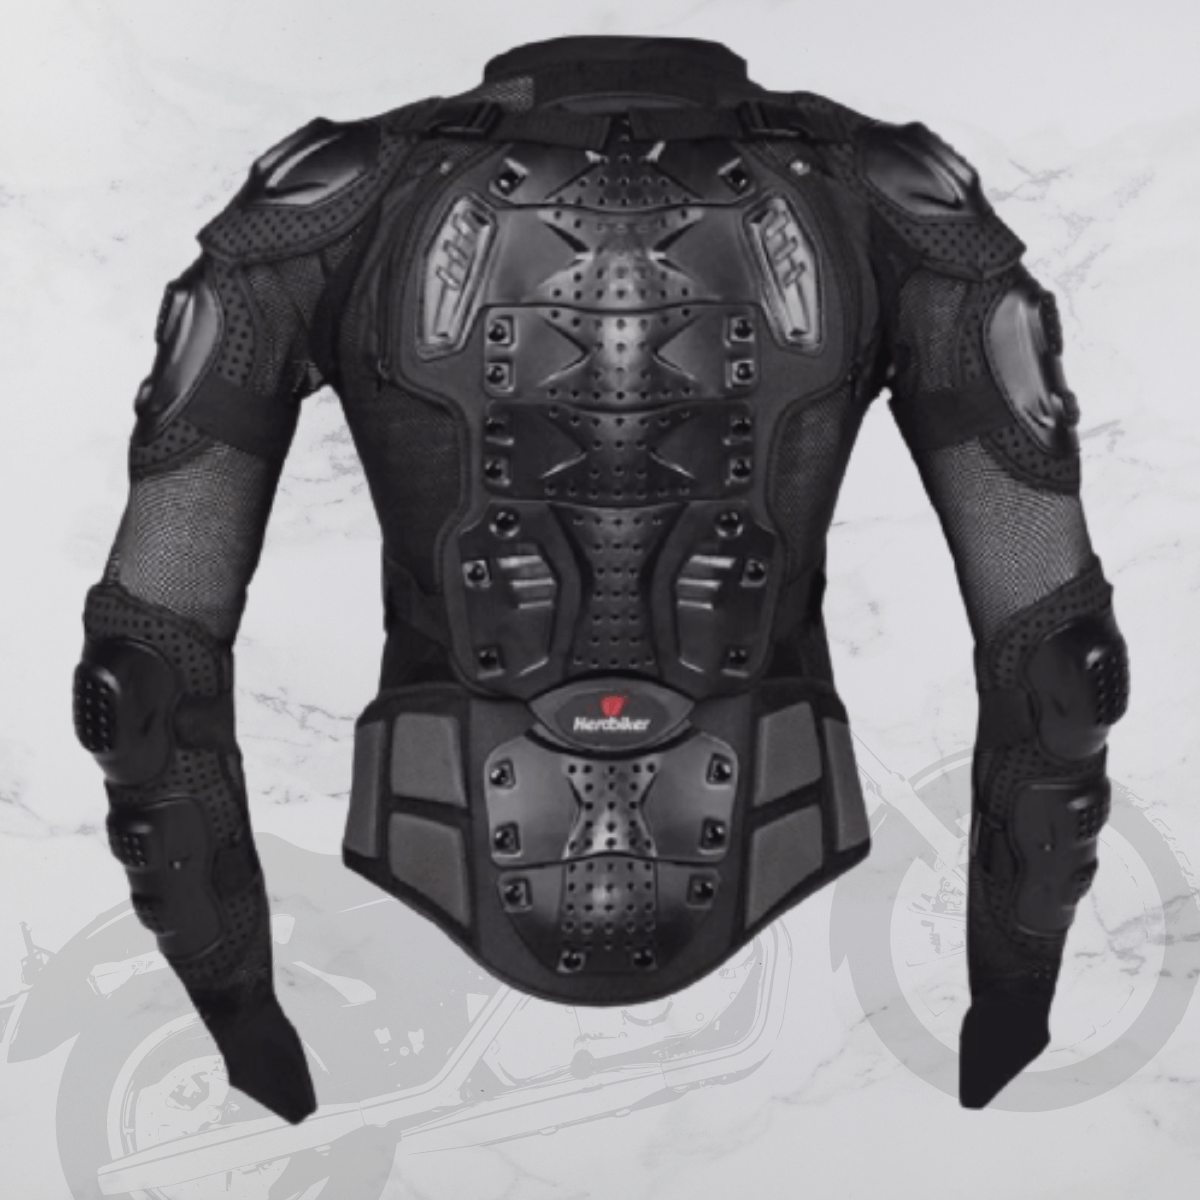 The durable black motorcycle jacket provides safety with its Cool Motorcycle Body Armor Set.